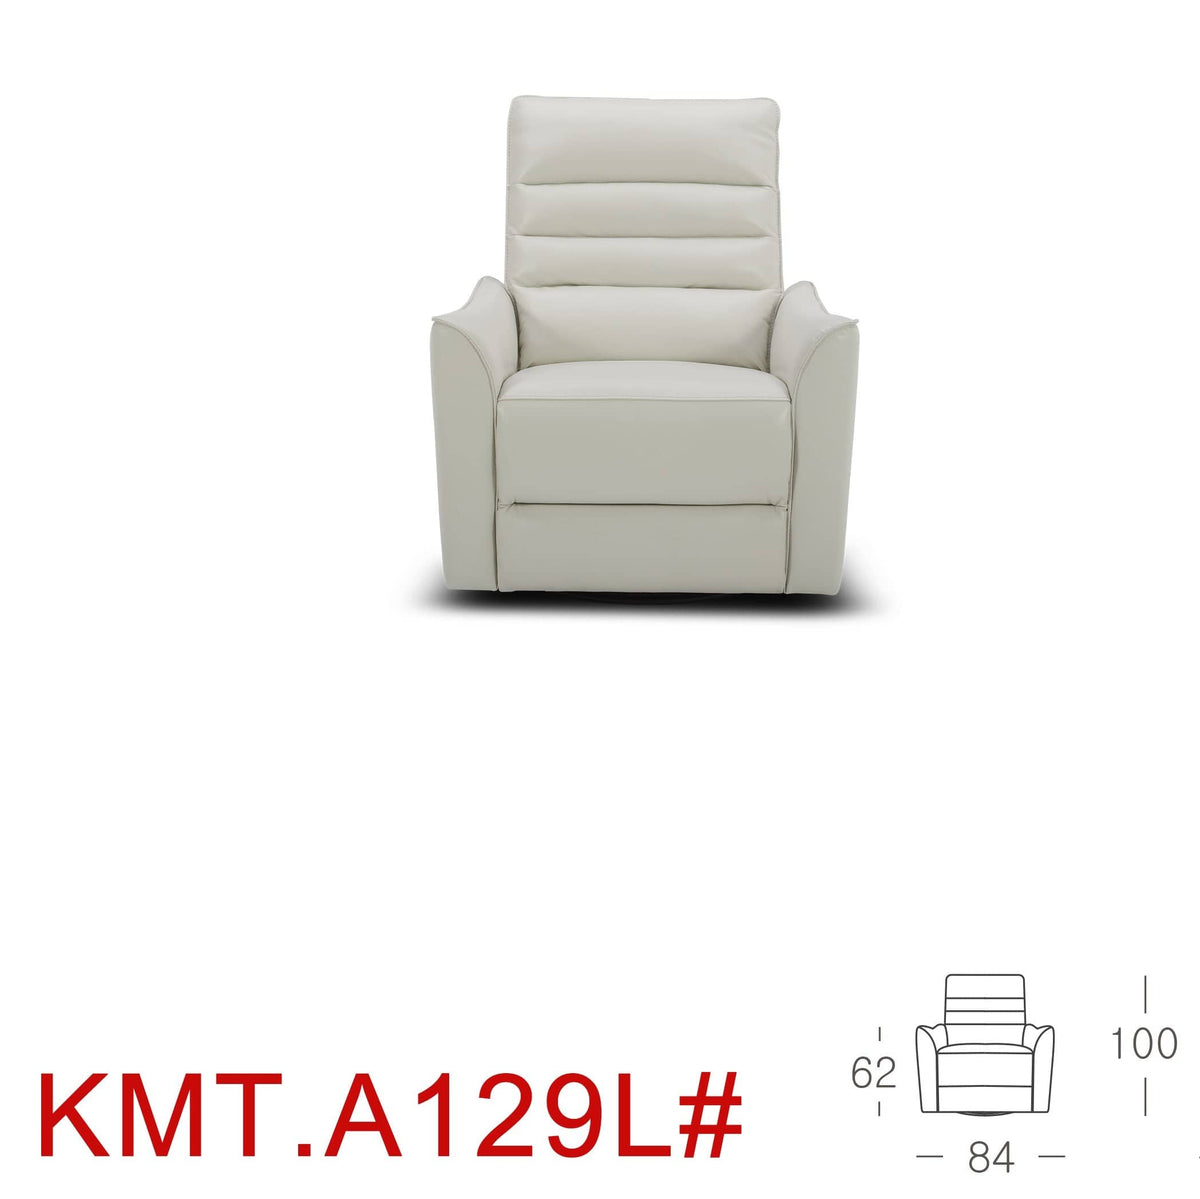 KUKA KMT.A129L Top Grain Leather 1 Seater Recliner Sofa picket and rail